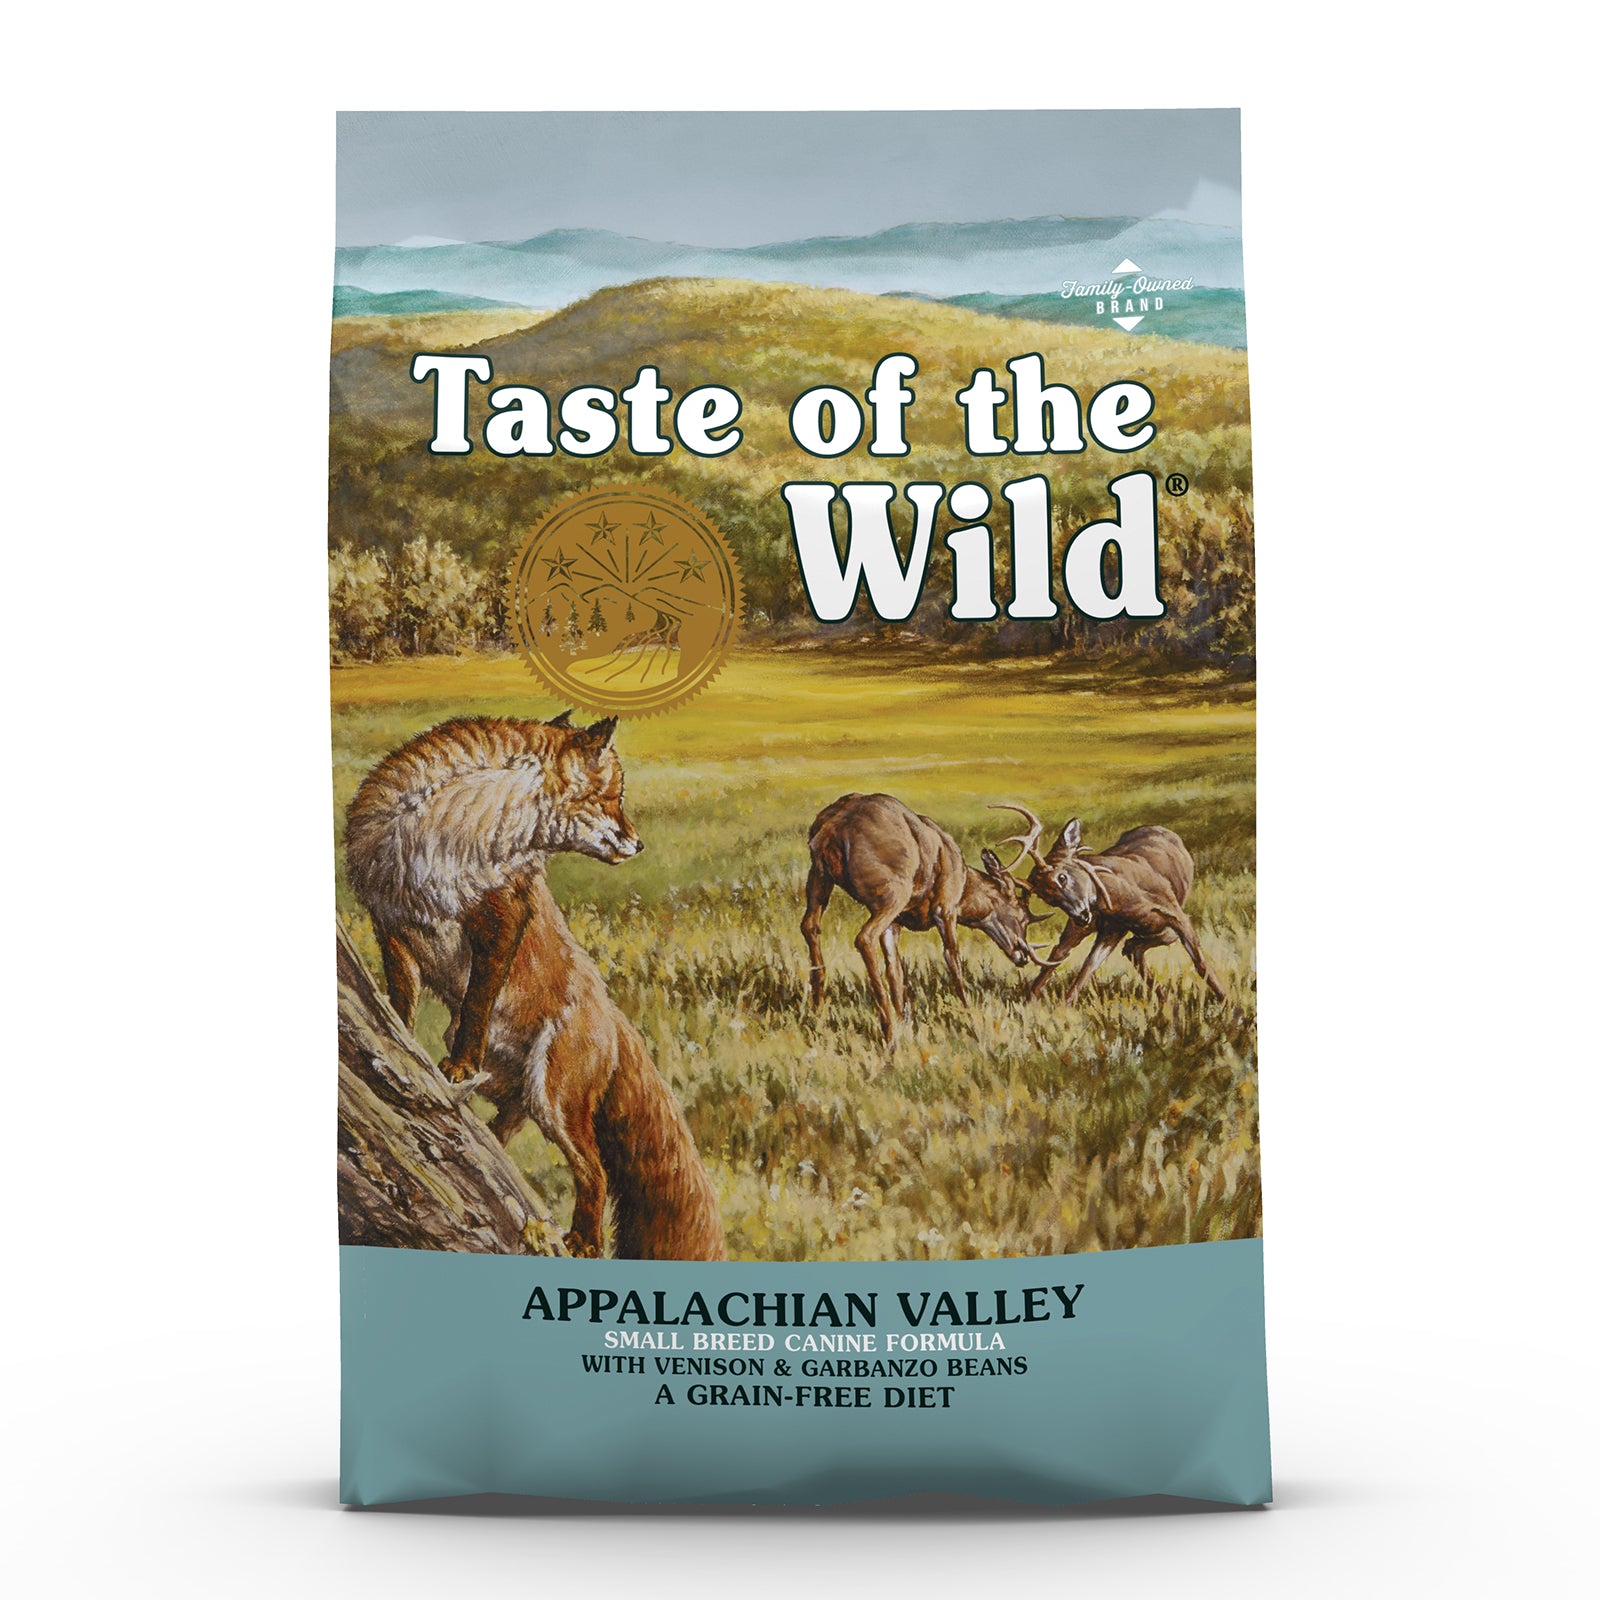 Taste of the Wild Dog Food Adult Small Breed Appalachian Valley Venison